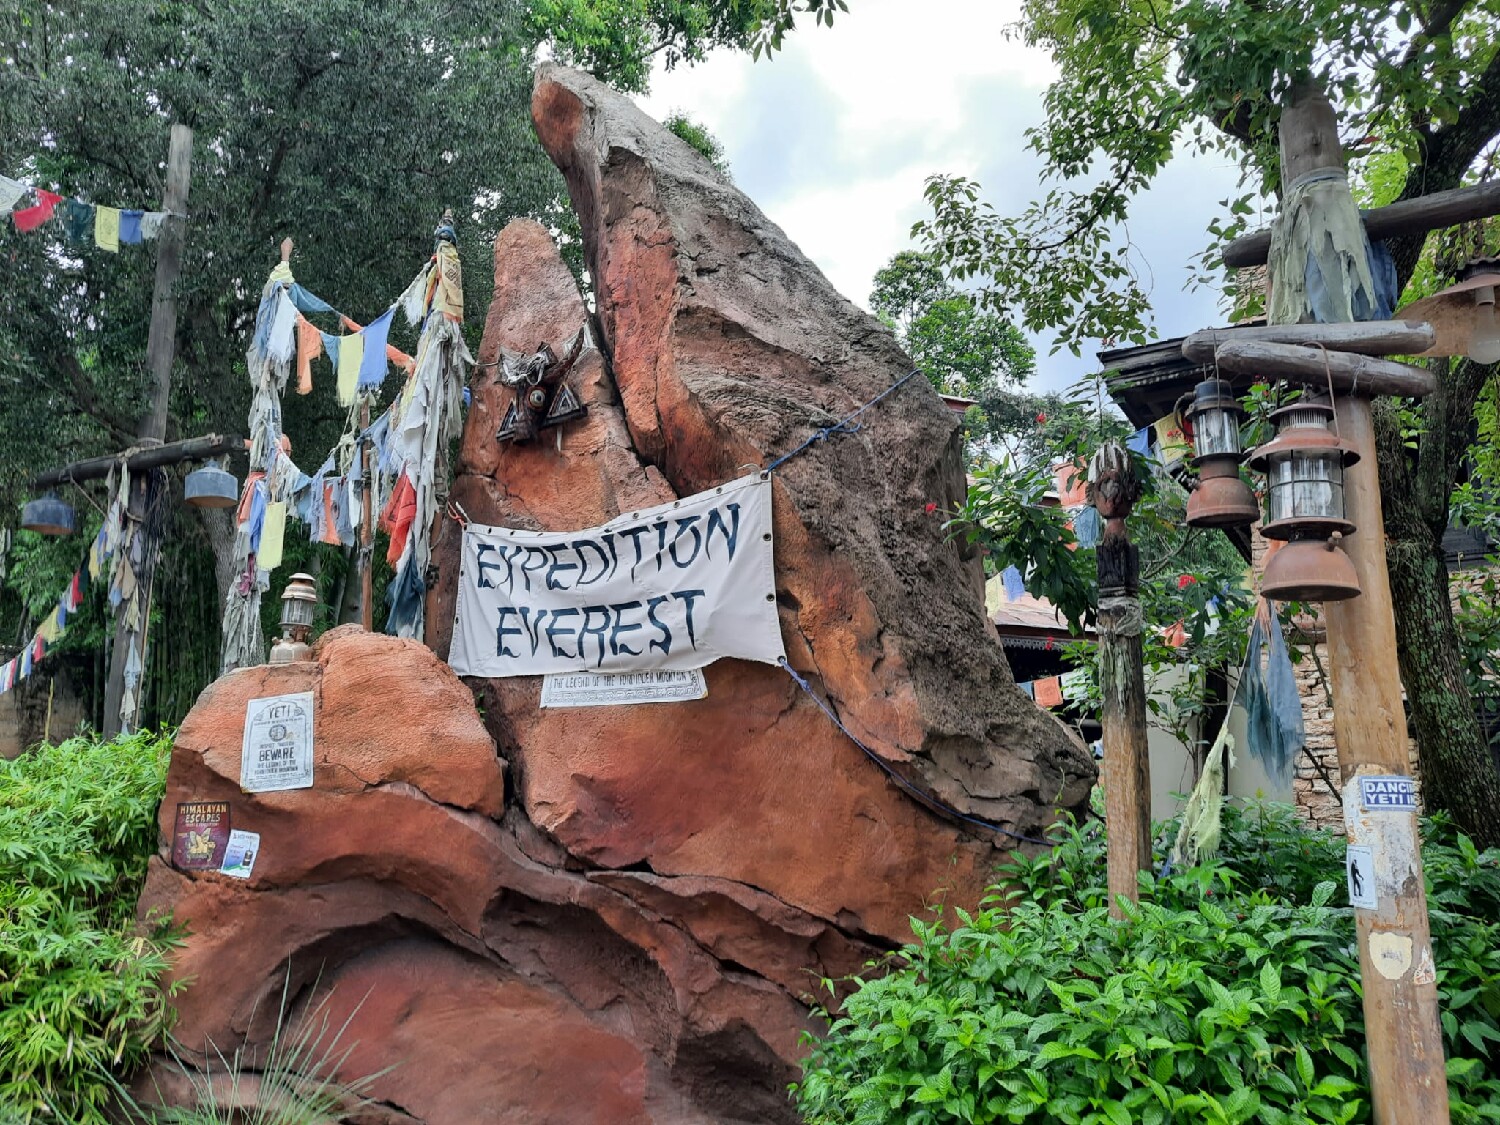 Expedition Everest – Legend of the forbidden mountain